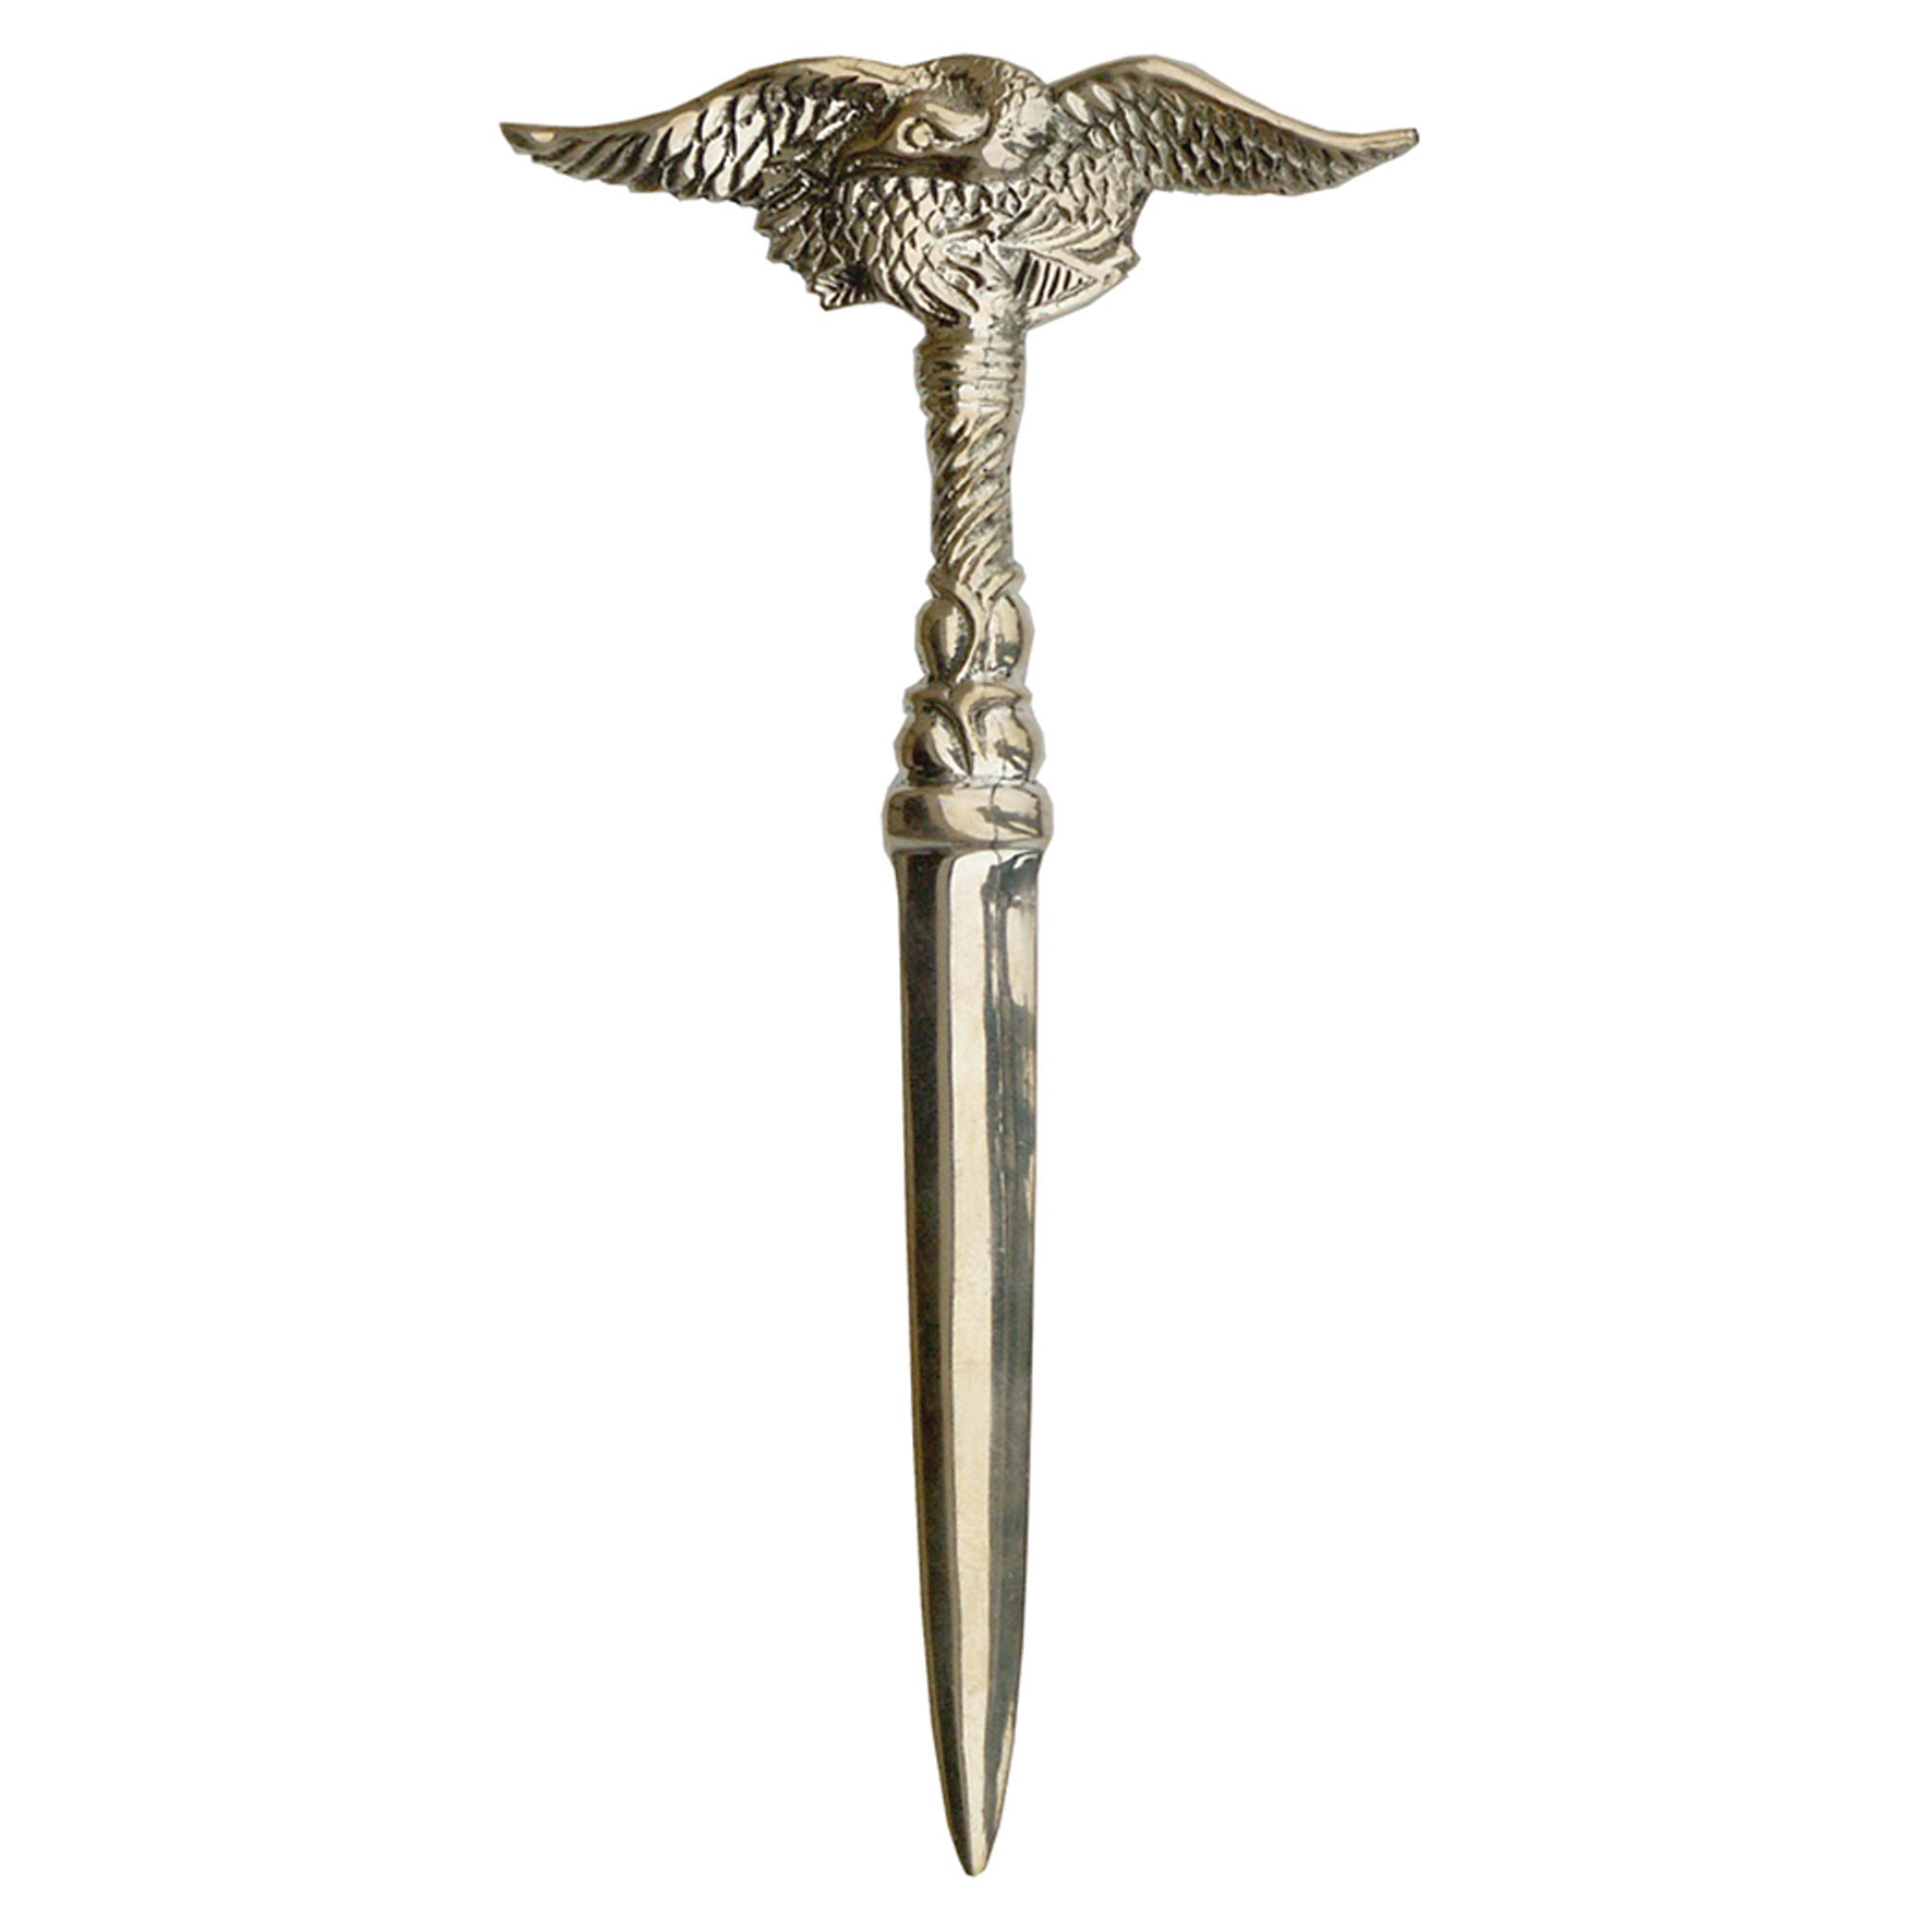 7-3/4 Solid Brass Spreadwing Eagle Letter Opener- Antique Vintage Style